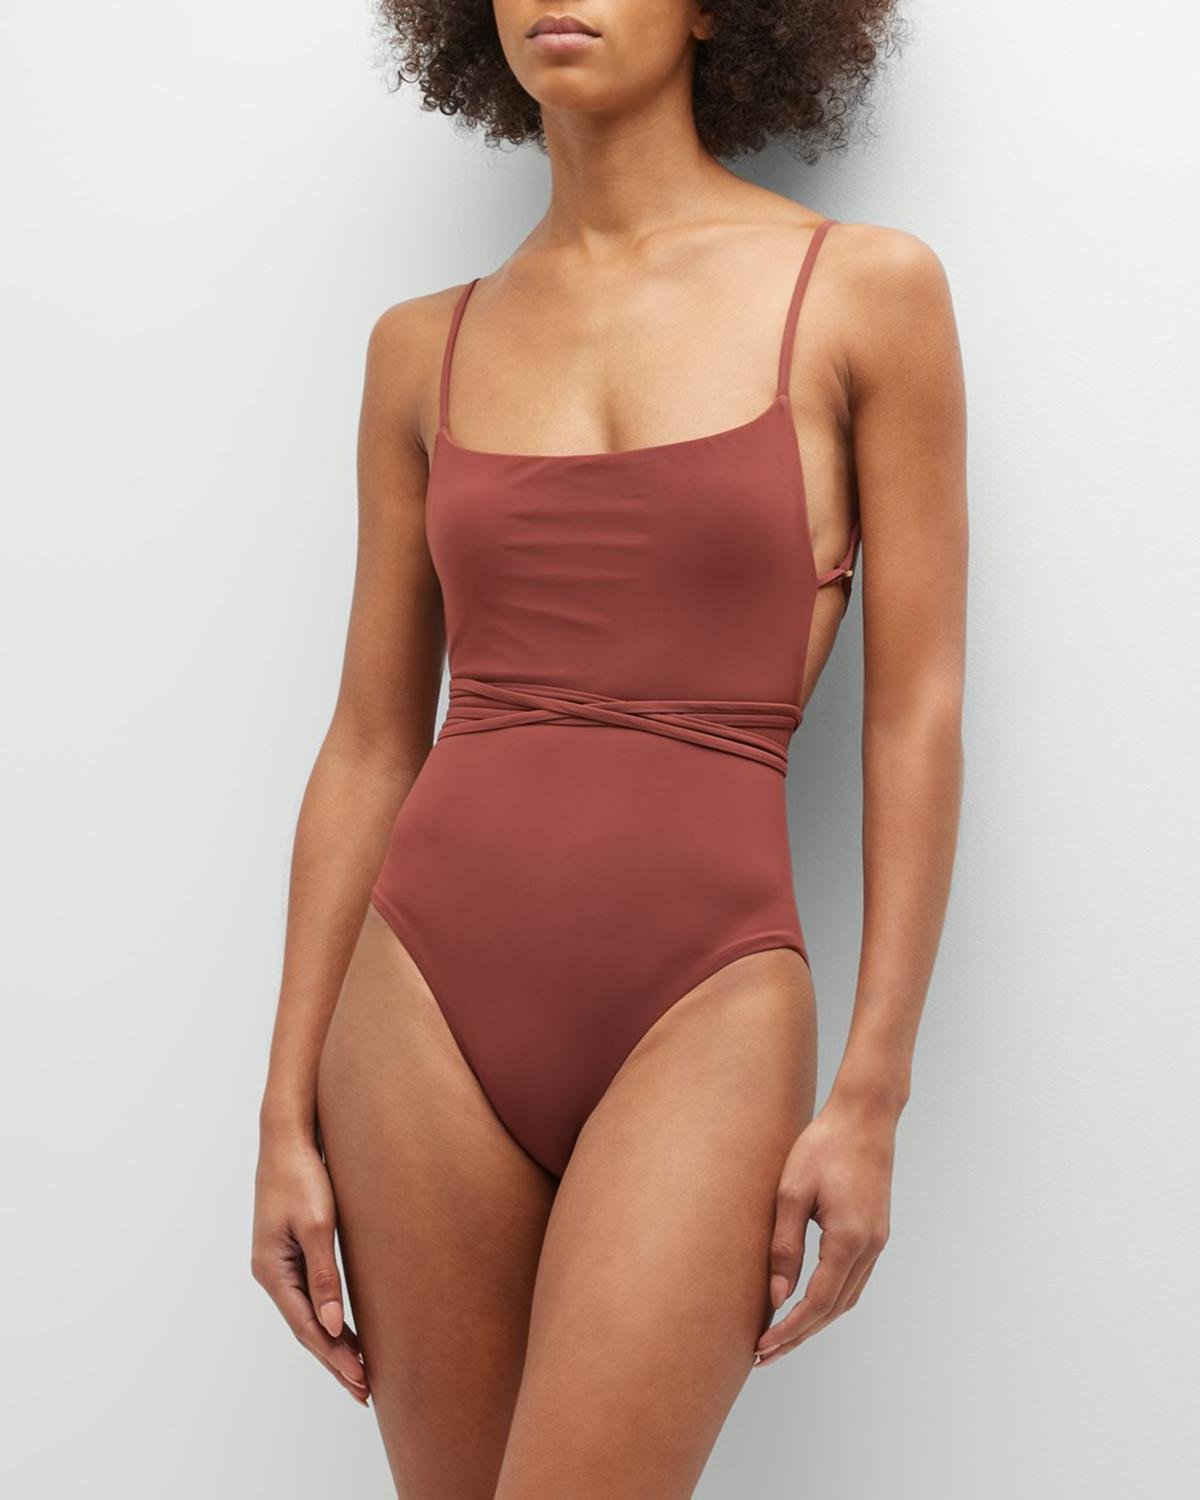 The K.M. Tie Cheeky One-Piece Swimsuit by ANEMOS